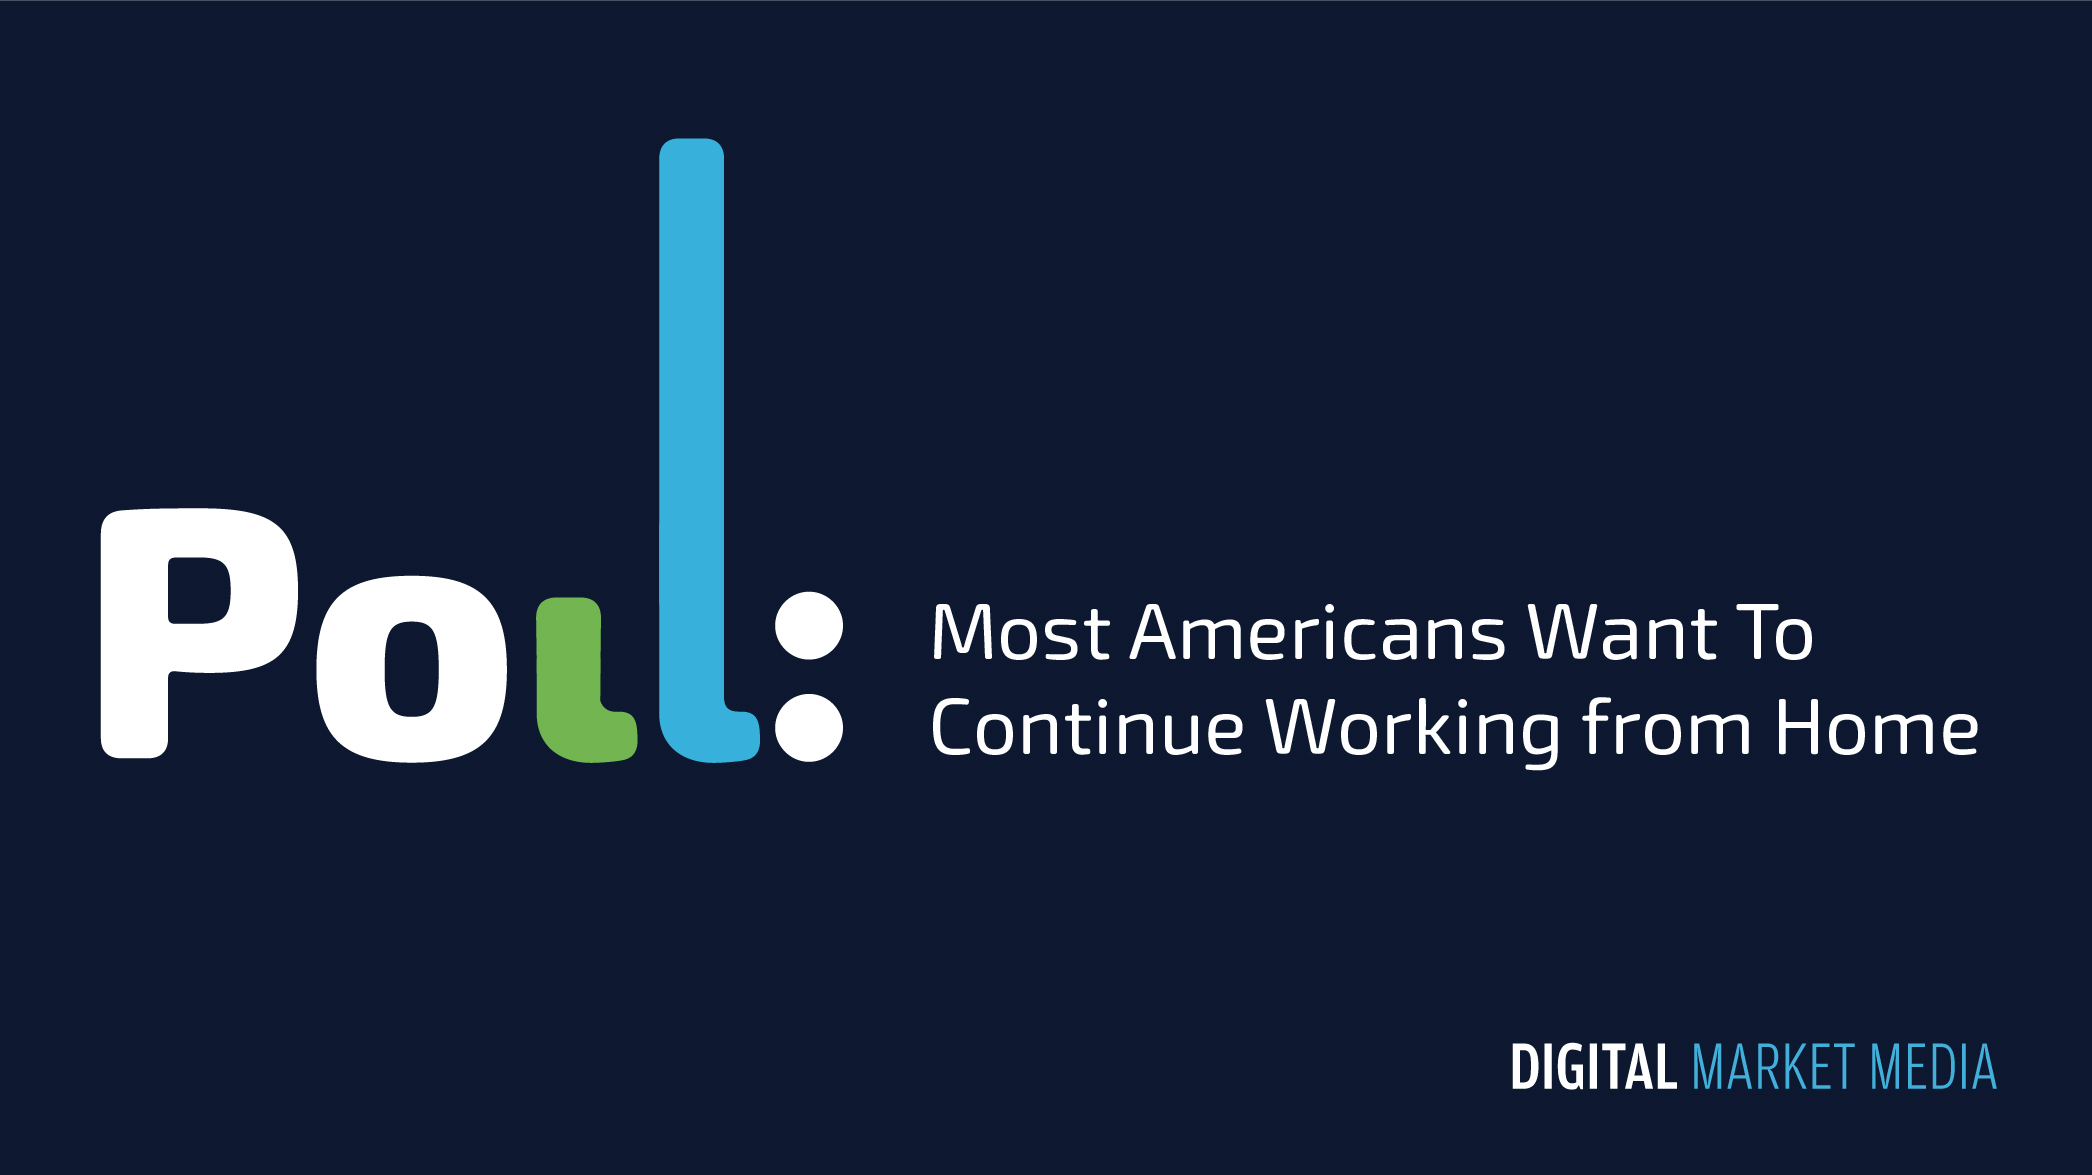 Poll: Most Americans Want to Continue Working from Home